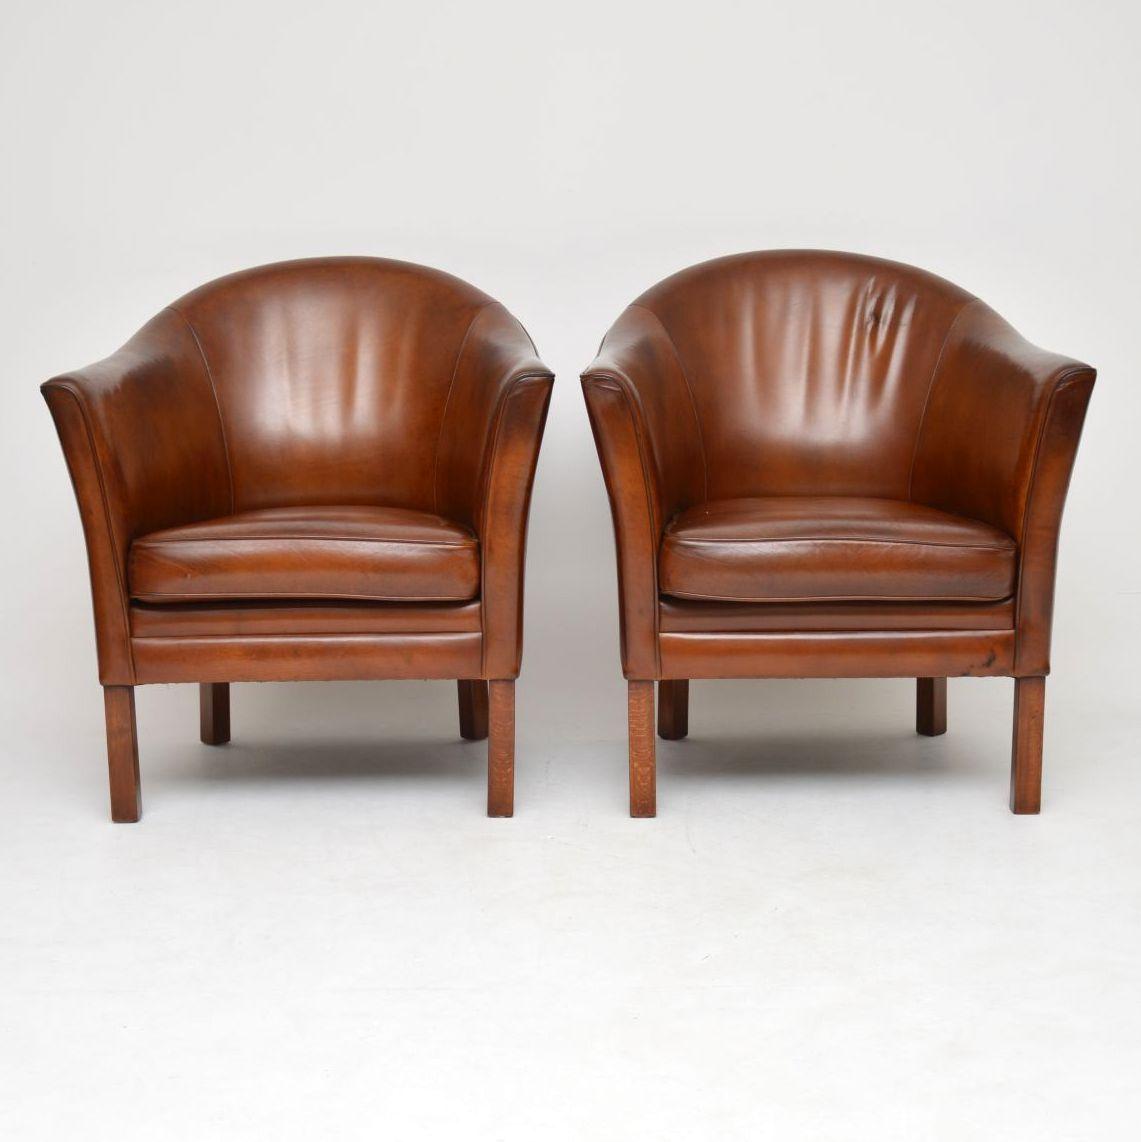 A stunning pair of vintage Danish armchairs, these were made by Mogens Hansen and they date from the 1960s. They are in great condition for their age, the leather has been hand coloured and revived by our professional leather polisher, they have a